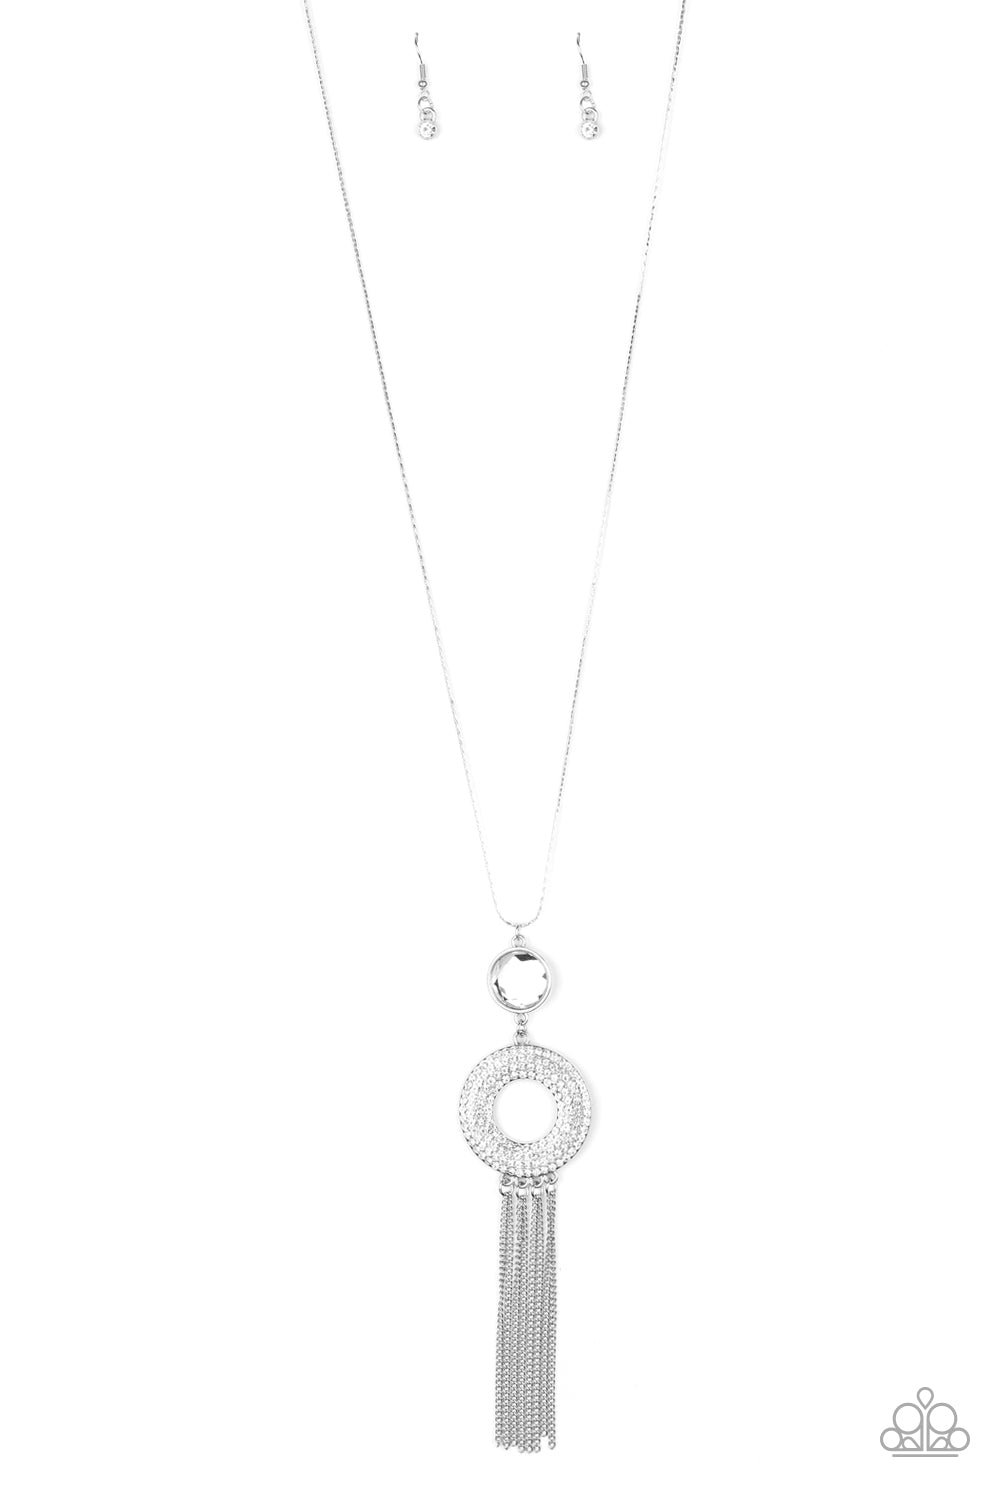 Sassy As They Come White Necklace - Paparazzi Accessories Item #N659 An oversized white gem attaches to a thick silver hoop encrusted in row after row of dazzling white rhinestones. Shimmery silver chains stream from the bottom of the stacked pendant at the bottom of a lengthened flat silver chain, creating a sassy tassel. Features an adjustable clasp closure. All Paparazzi Accessories are lead free and nickel free!  Sold as one individual necklace. Includes one pair of matching earrings.